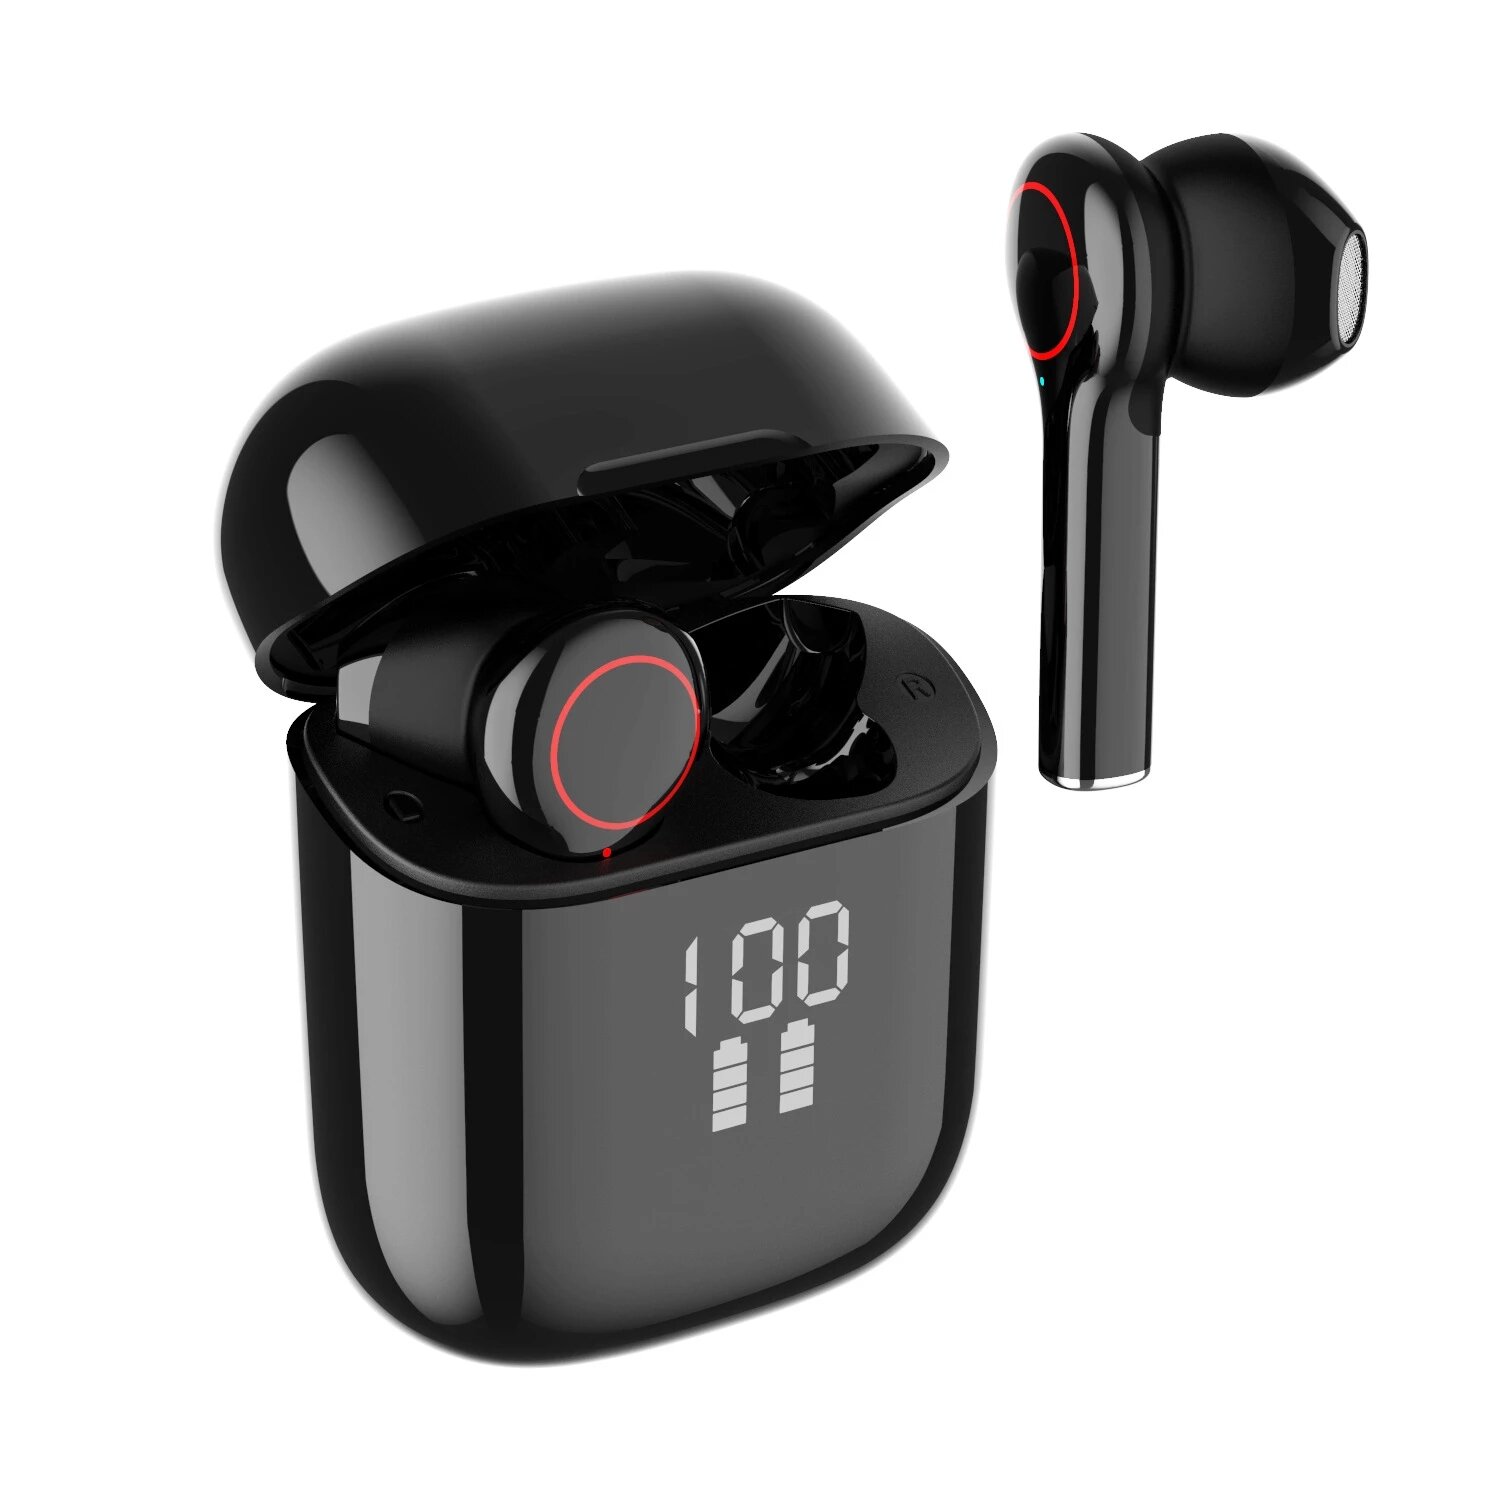 Bakeey L31pro TWS bluetooth 5.0 Earphones Touch Digital Display Business Sports True Stereo Headset 